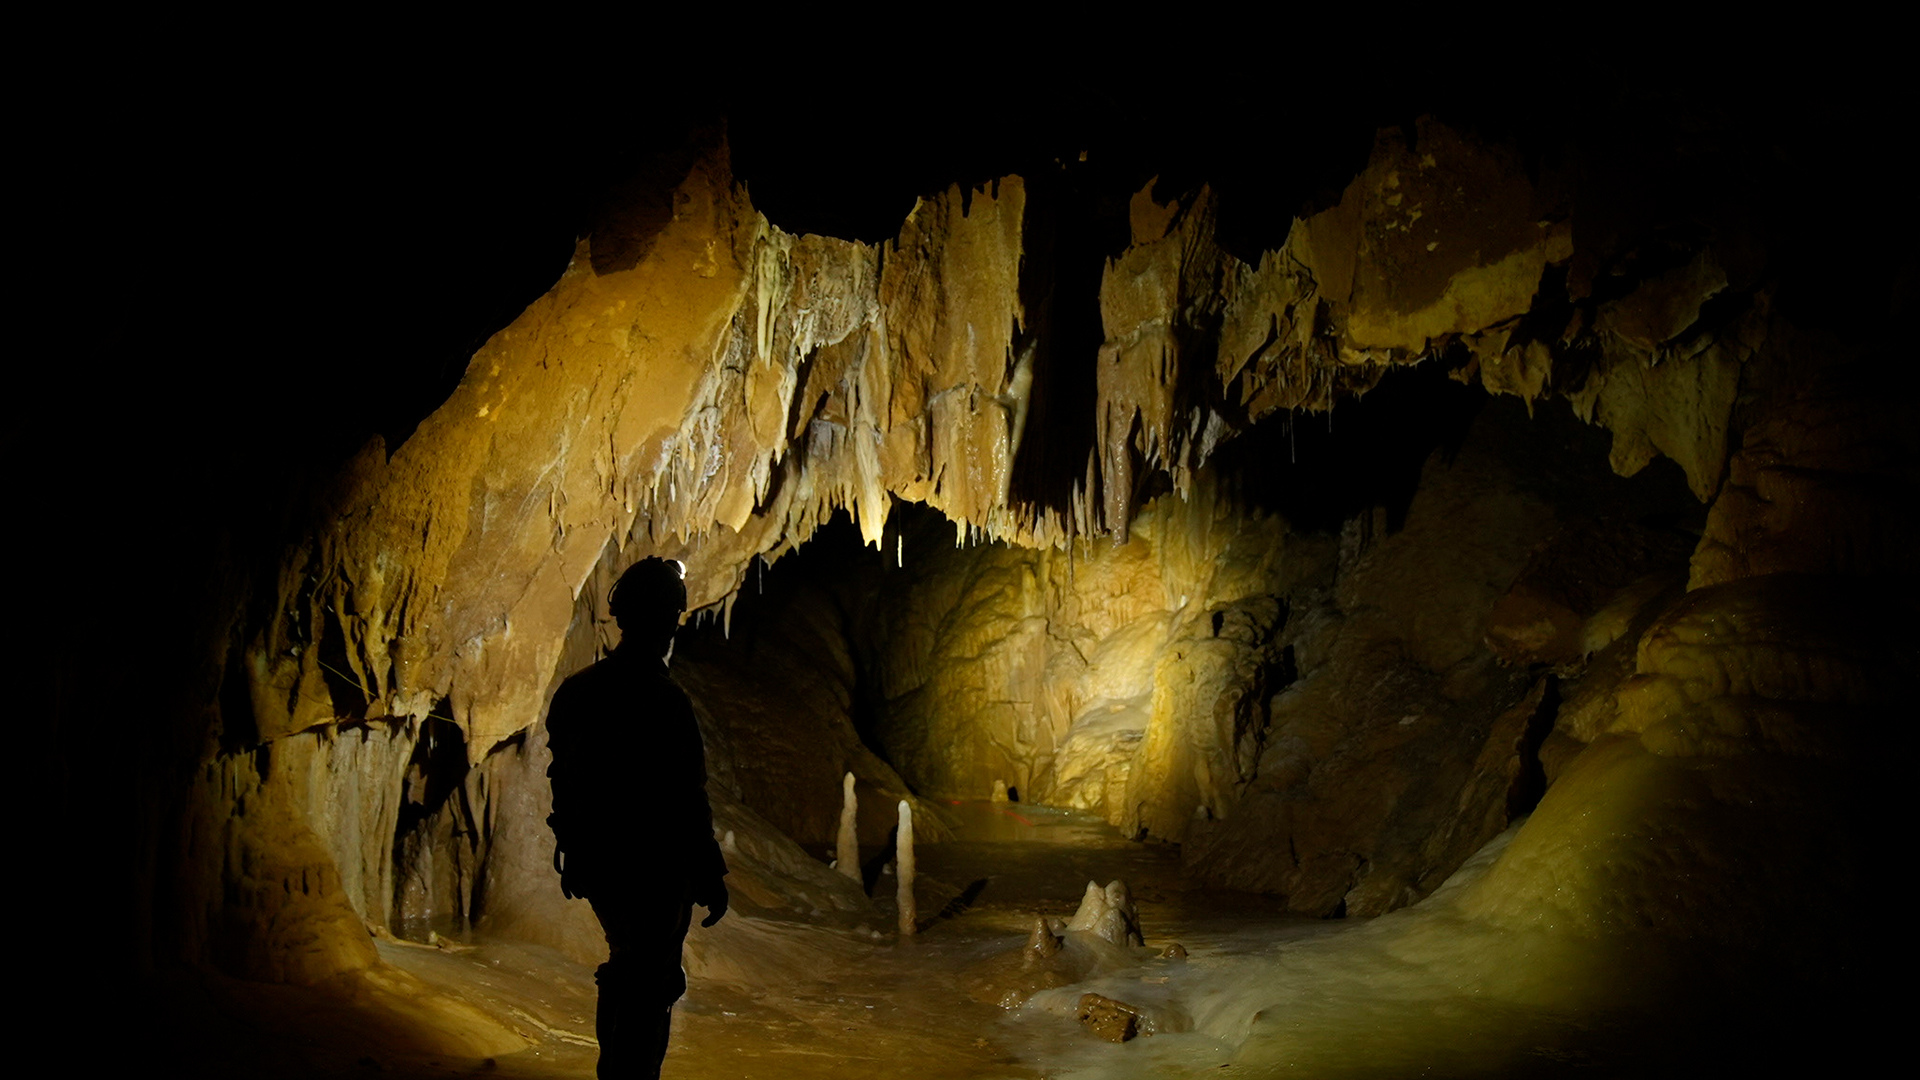 A Cheve caving team member lights up the cavern in front of him deep beneath the cave's... [Photo of the day - June 2022]